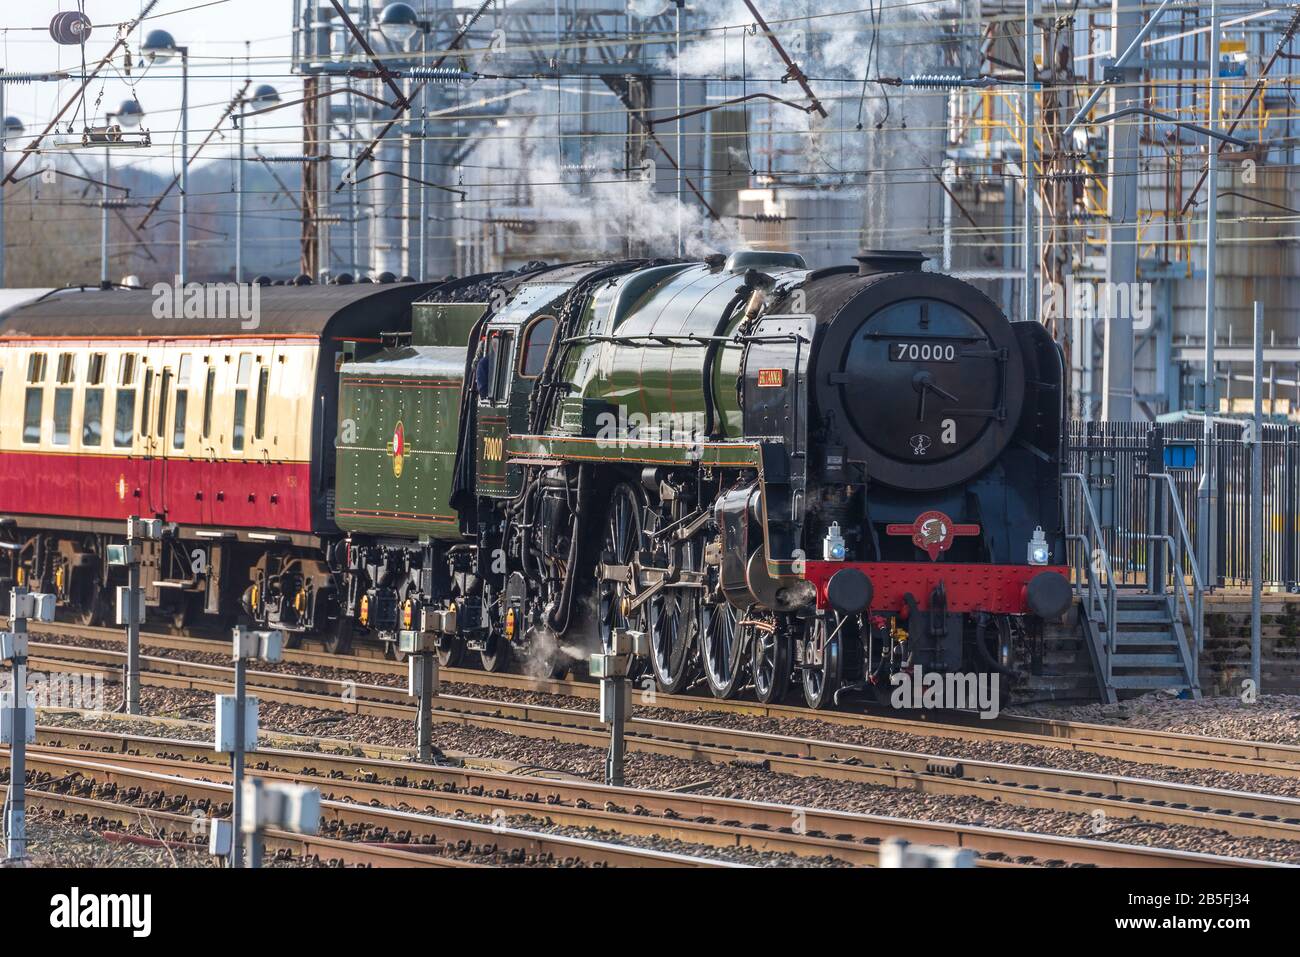 British Railways Standard Class 7, number 70000 Britannia a preserved steam locomotive, owned by the Royal Scot Locomotive and General Trust. Stock Photo